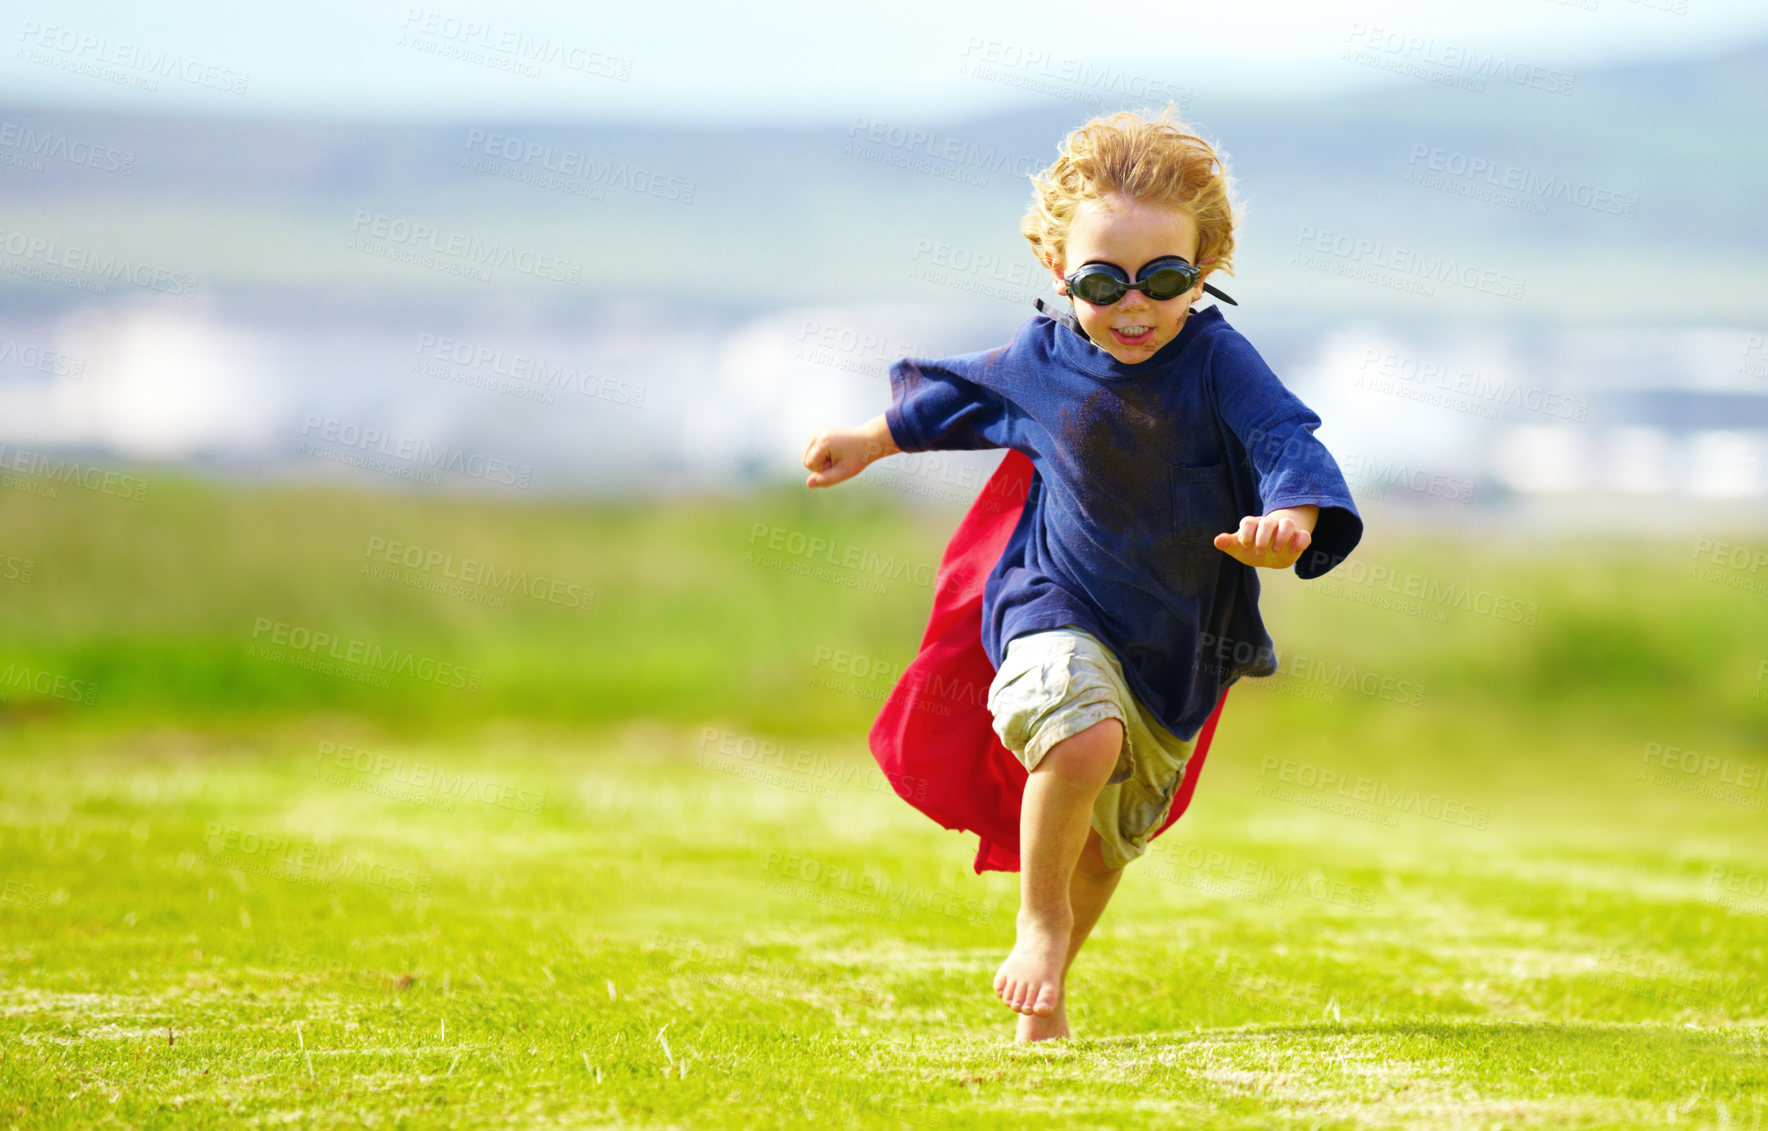 Buy stock photo Young boy, costume and running in park, playing and carefree outdoor with happiness or playful child on grass. Freedom, energy or youth and happy kid in cape or goggles fun on green lawn with mockup